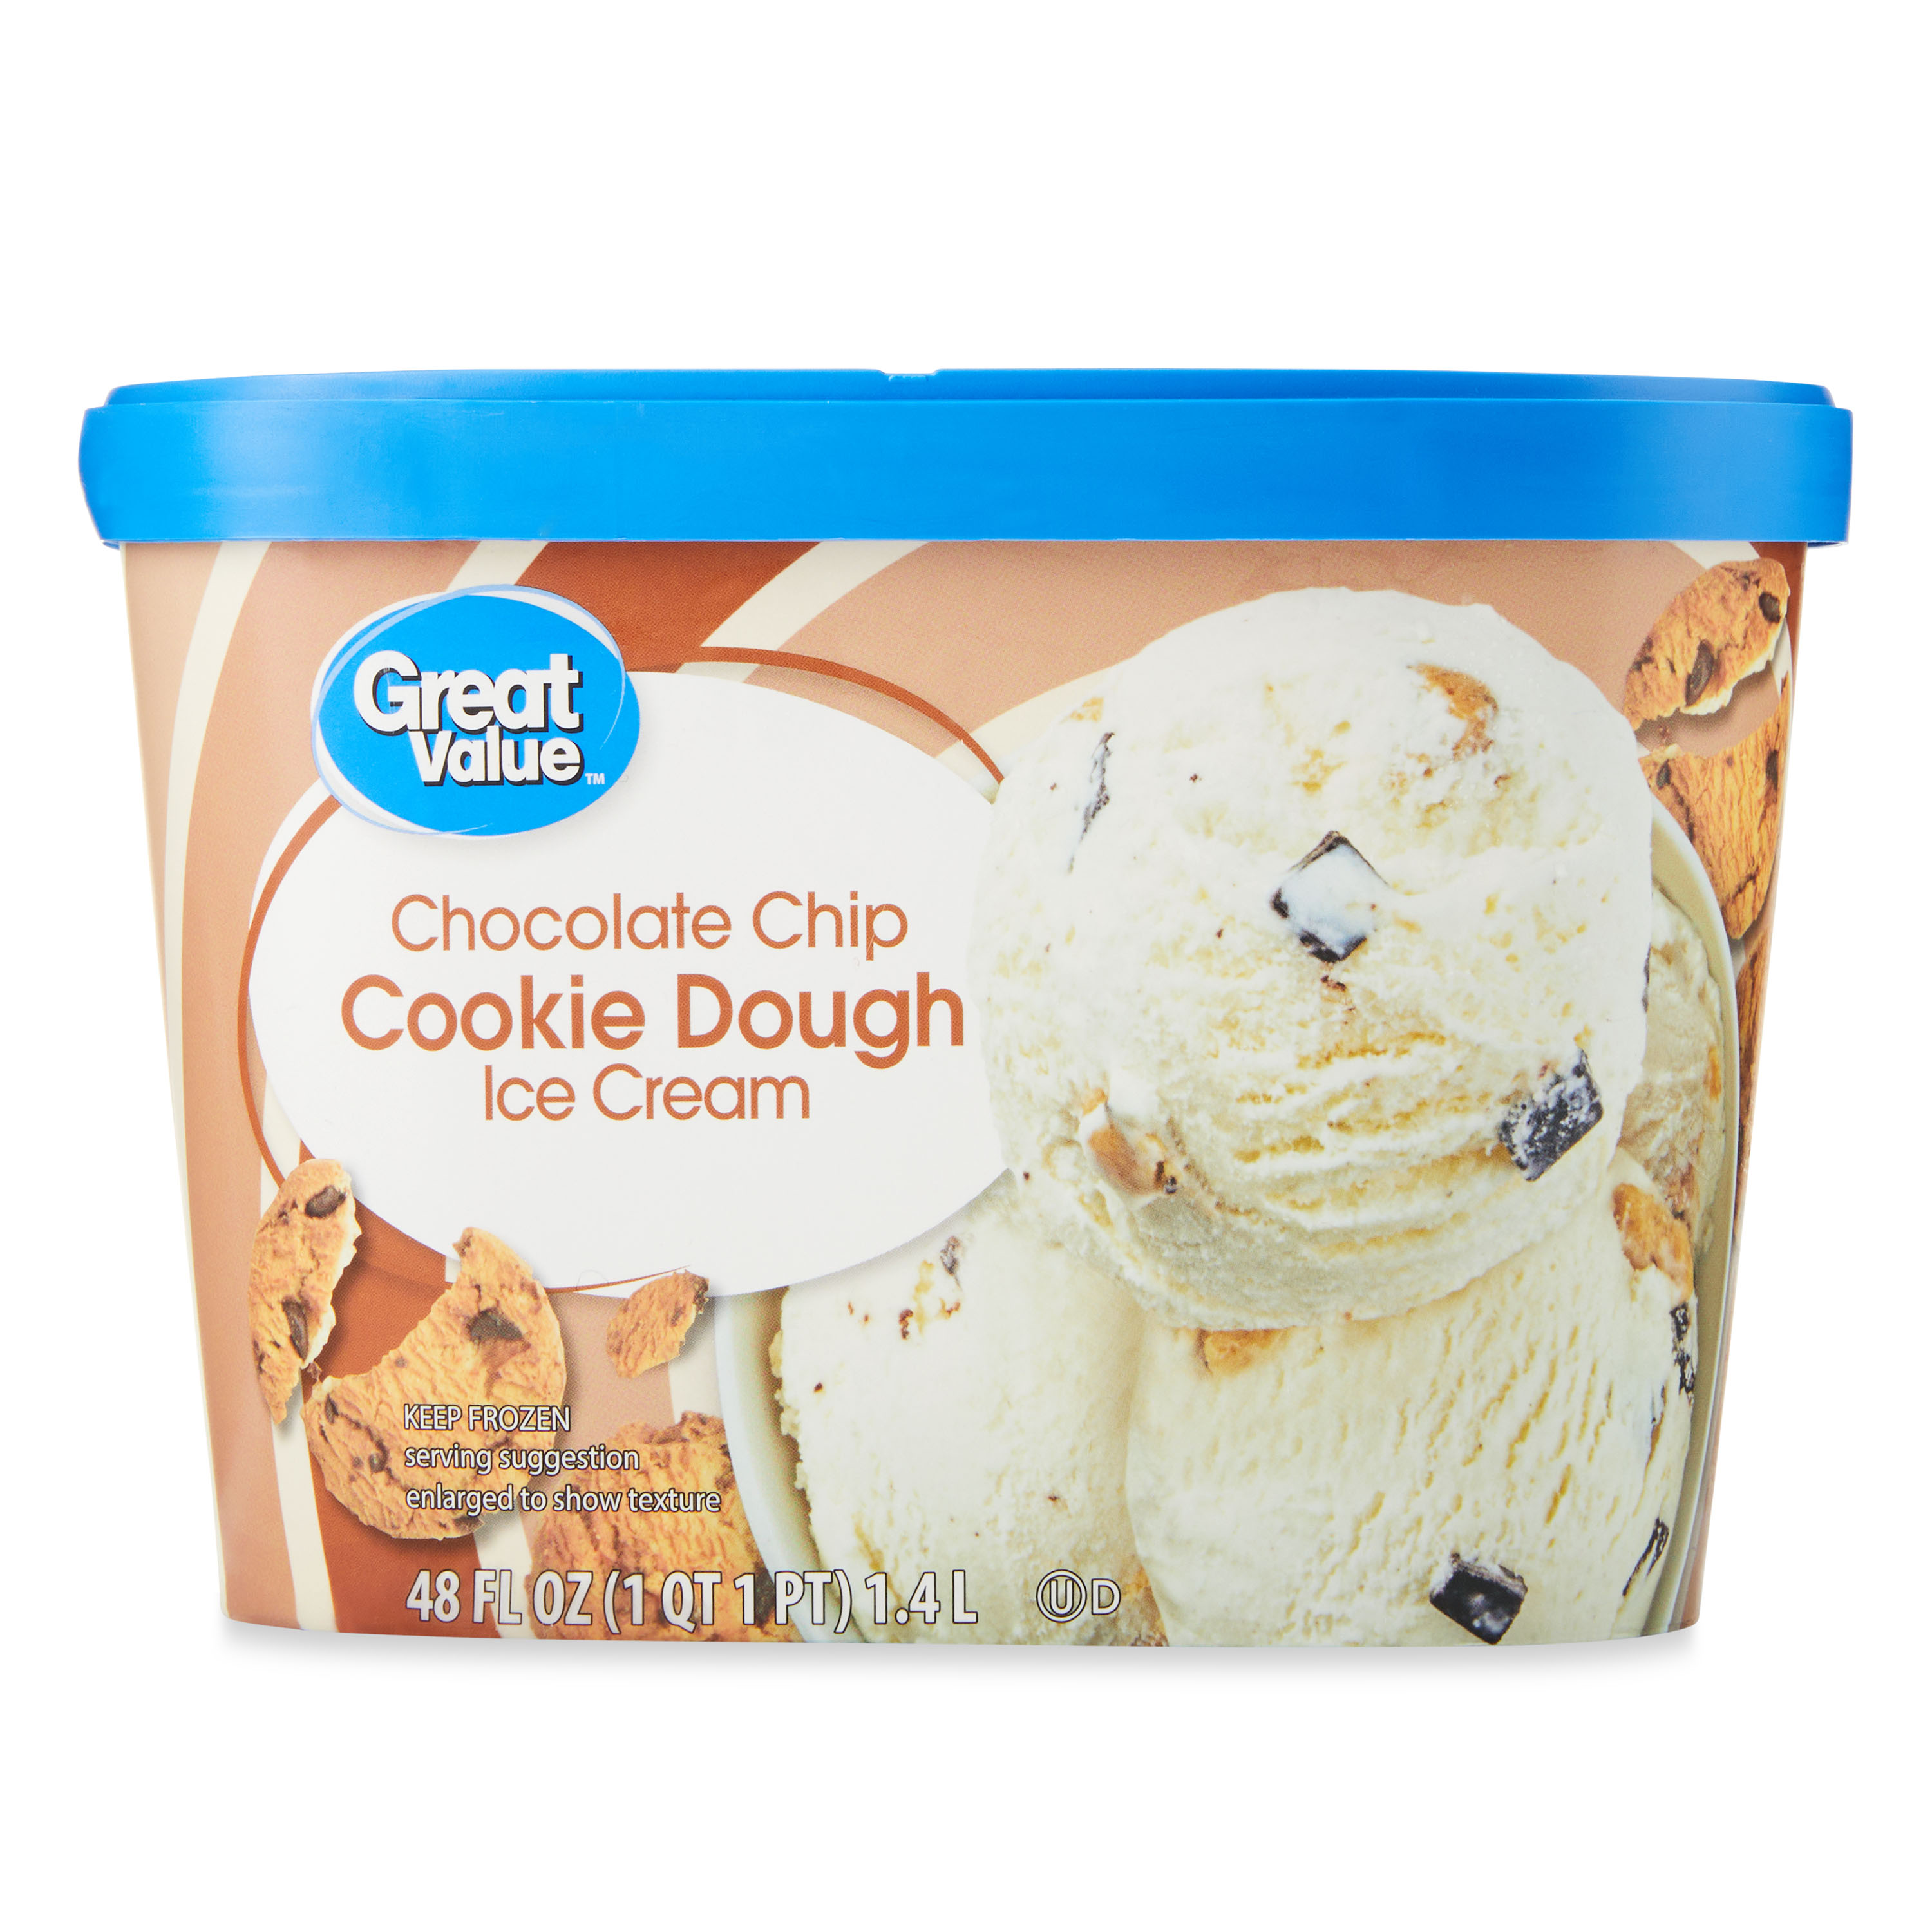 Great Value Chocolate Chip Cookie Dough Ice Cream, 48 fl oz - image 1 of 8